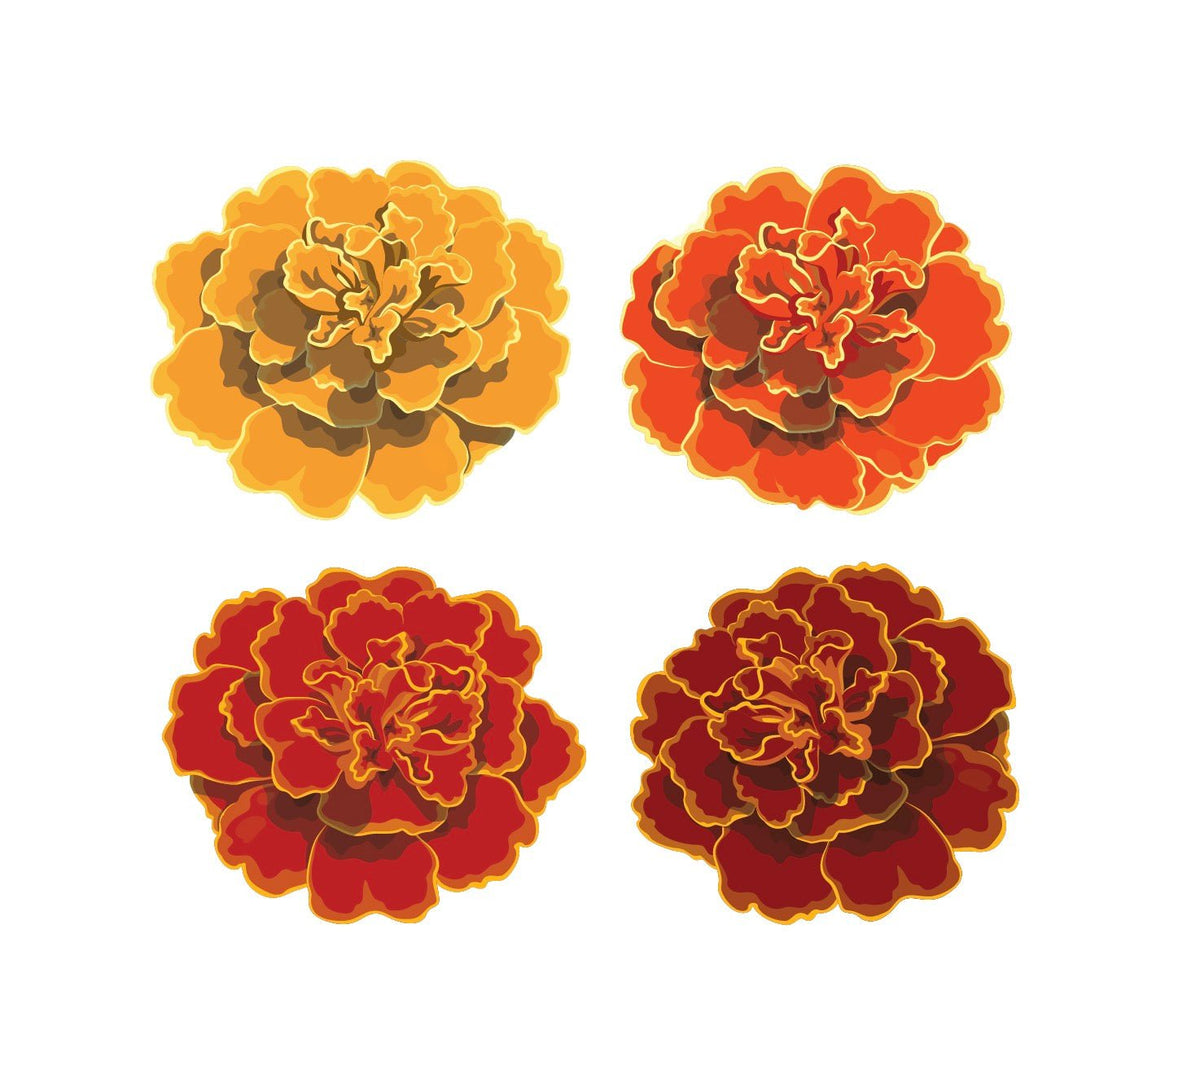 Four stylized Day of the Dead Marigolds in shades of orange and red, depicted with a gradient effect, isolated on a white background. [Brand Name: Cover-Alls]